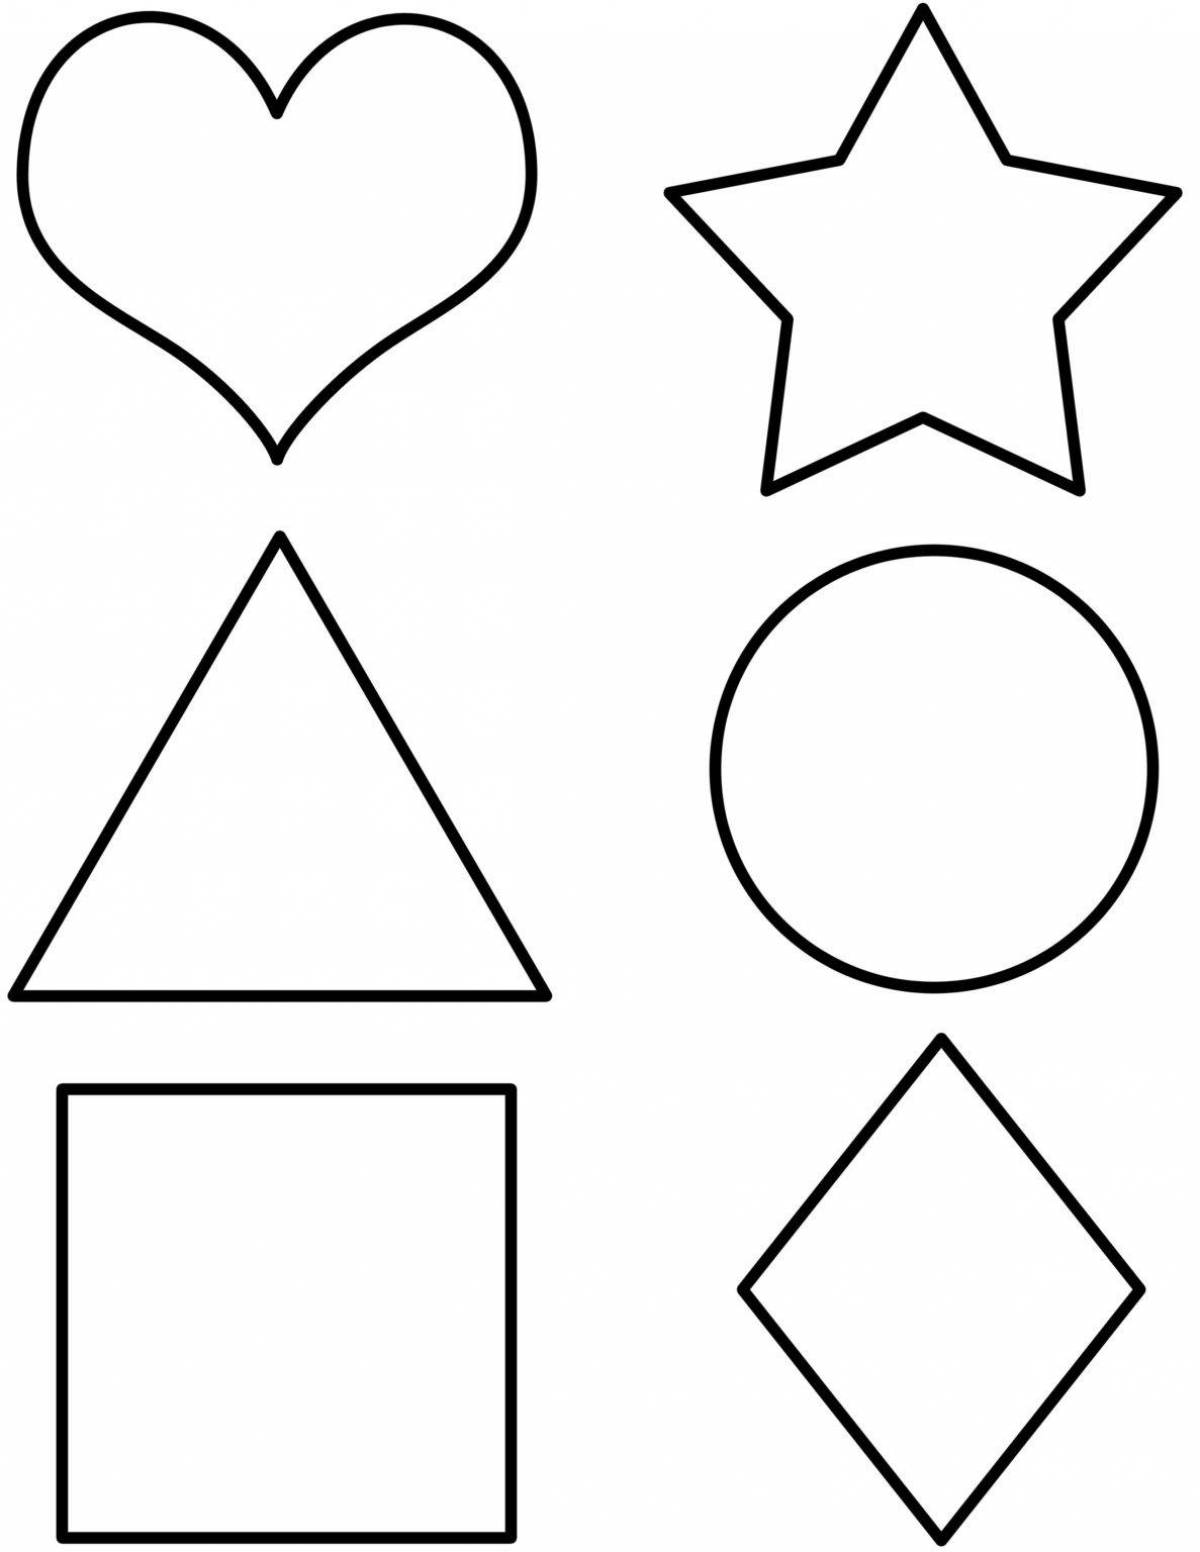 Geometric figures for children 3 4 years old #2